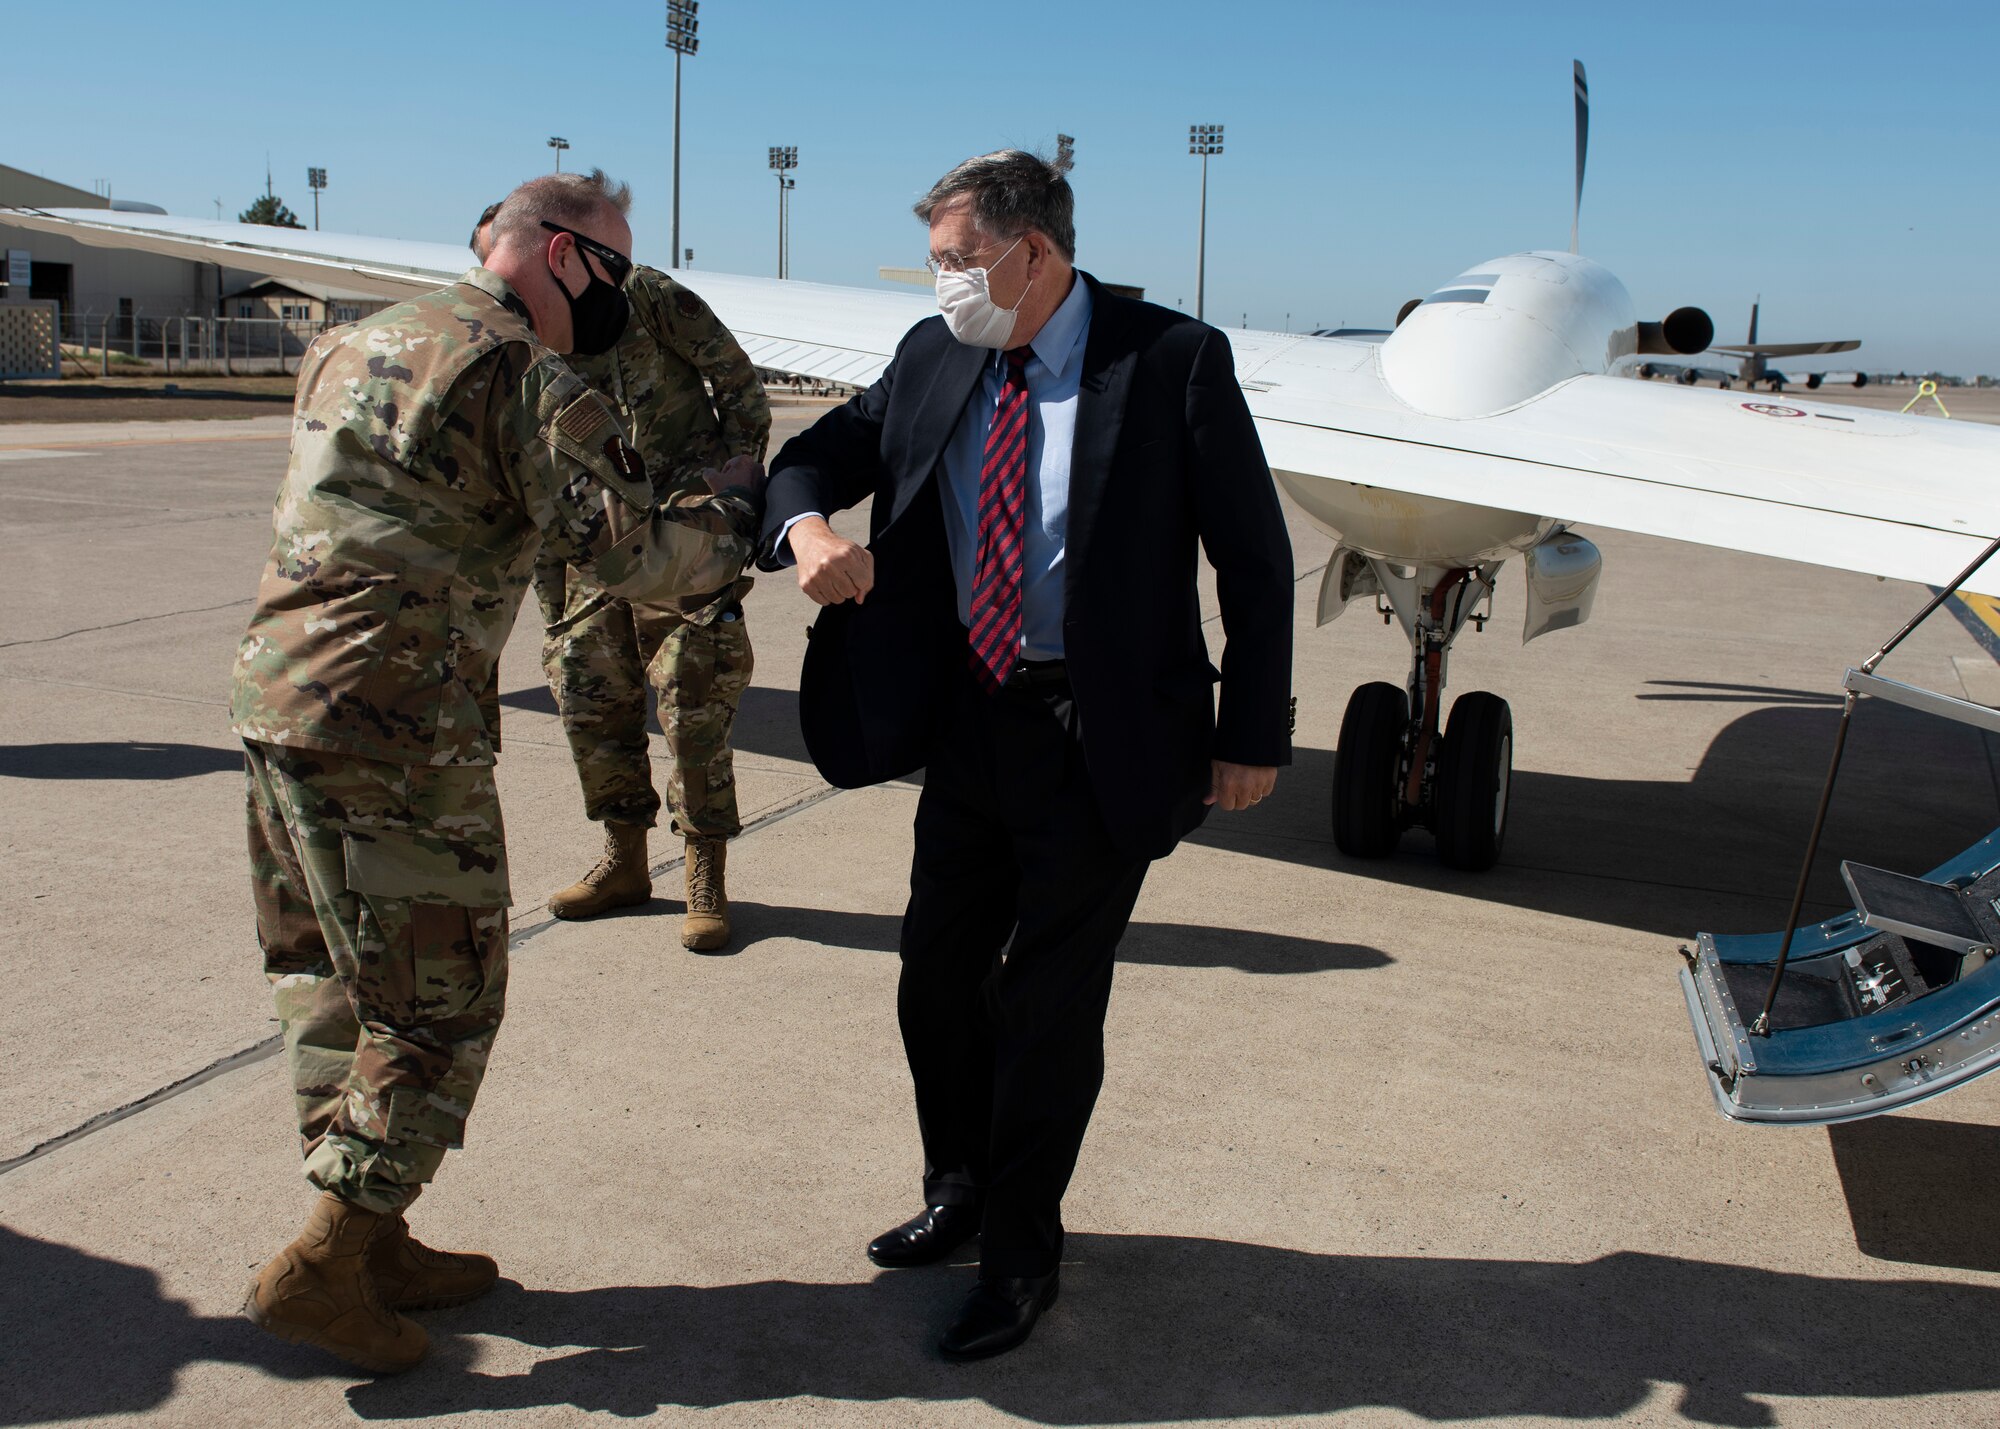 U.S. Air Force Col. John Creel, 39th Air Base Wing commander, greets U.S. Ambassador to Turkey David Satterfield with an elbow bump on the base's flightline.